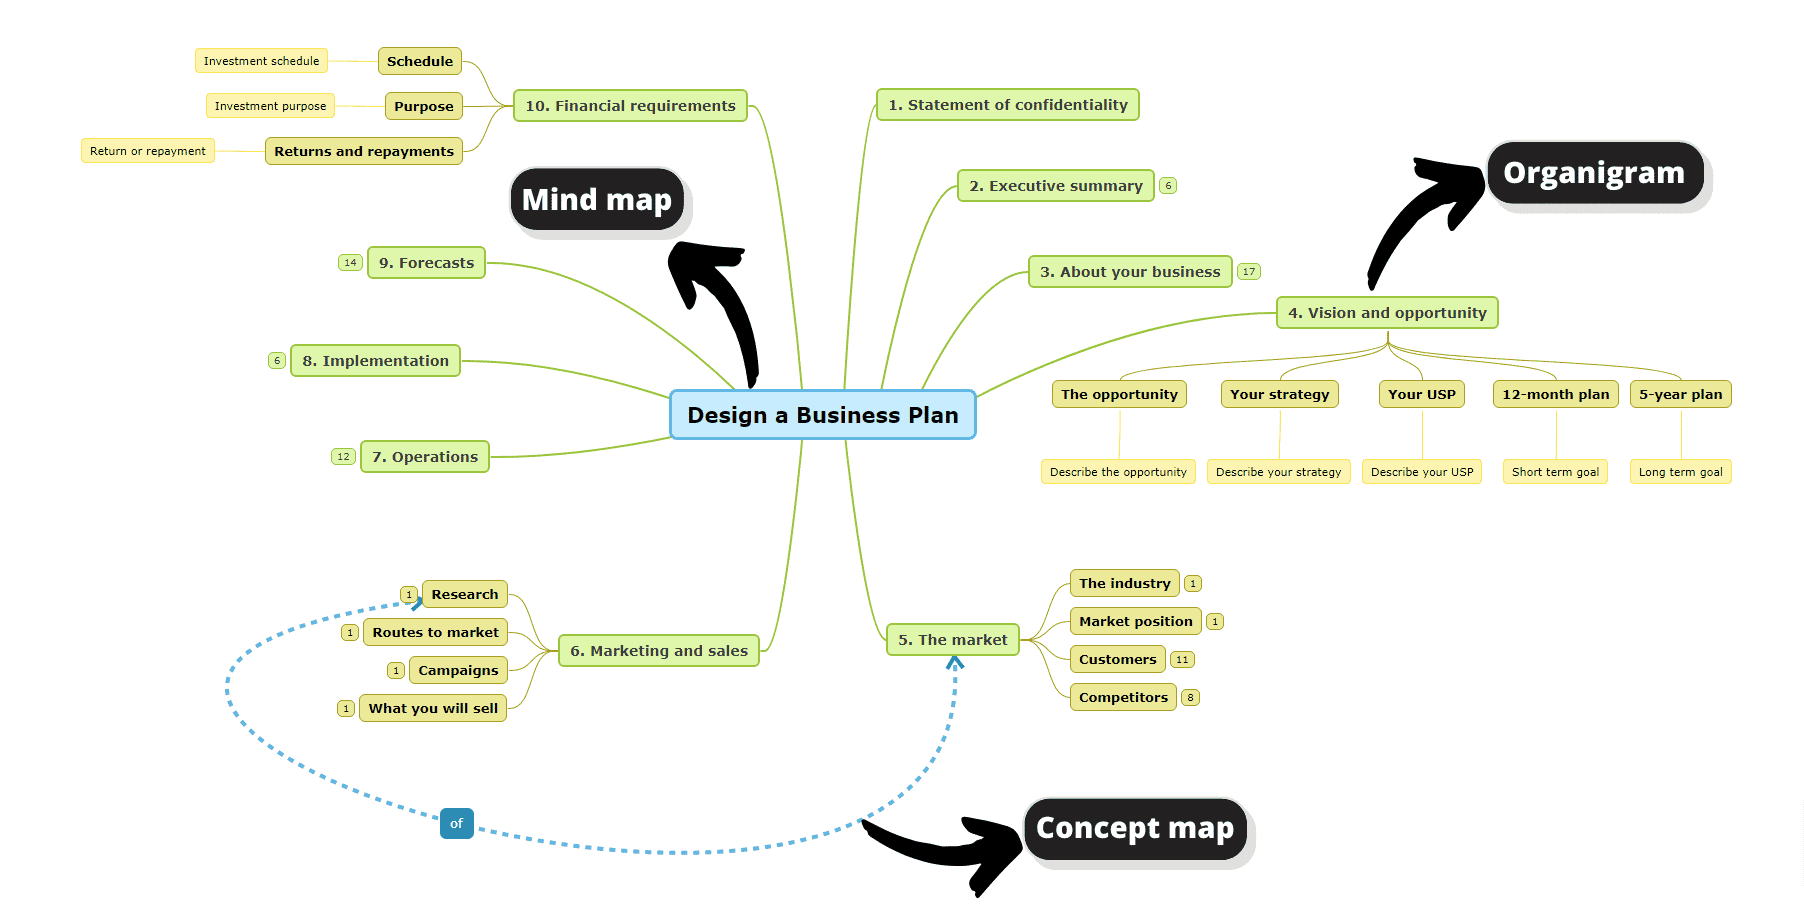 Combination of different structures (mind map, concept map, organigram) in one diagram